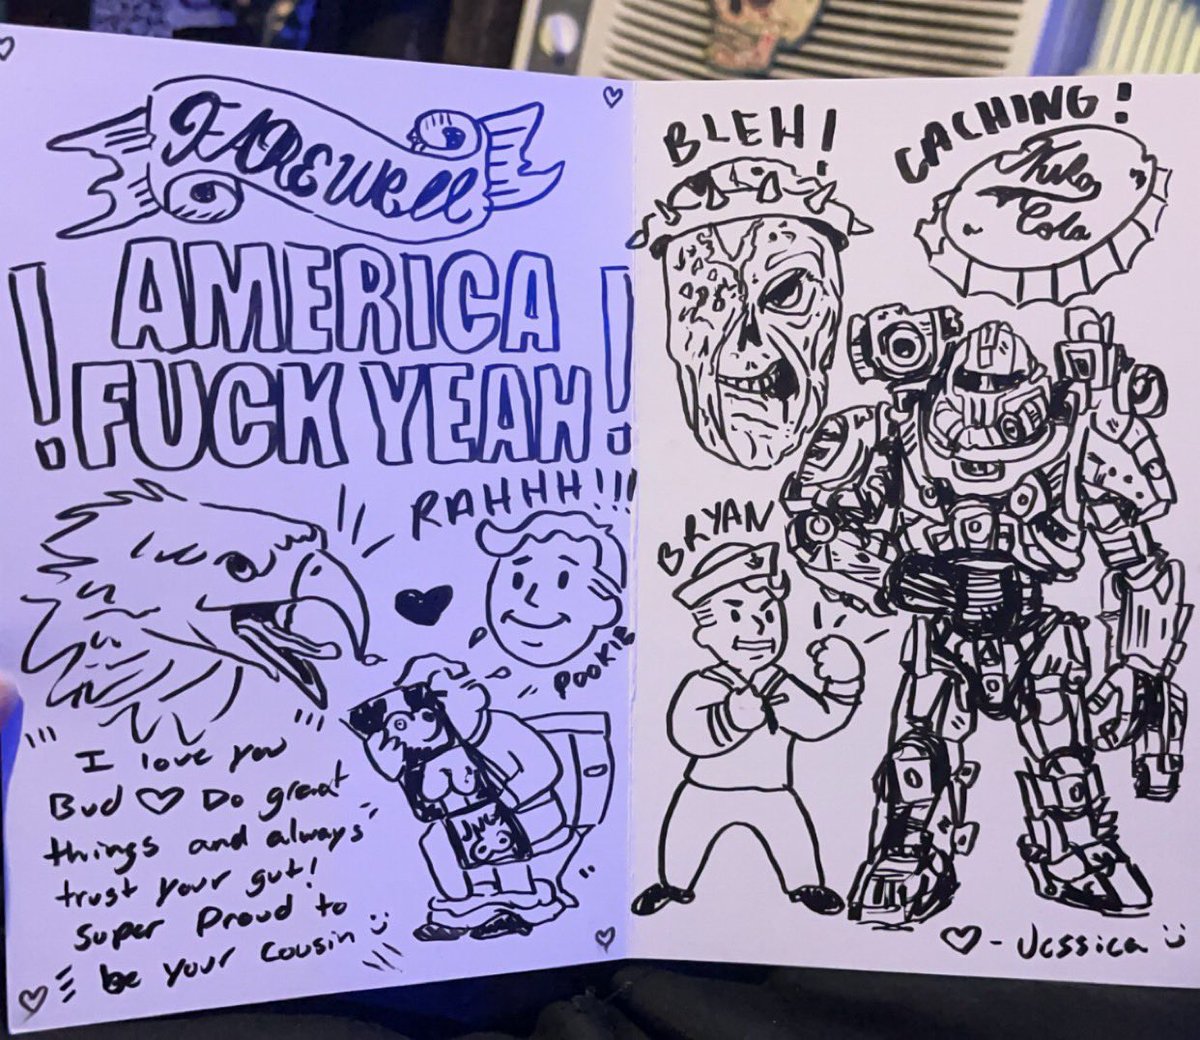 My cousins having a going away party this weekend cuz he’s off to the #navy and he loves #fallout so I made him this card 😭🫡🇺🇸‼️🦅
-
-
#myart #inking #farewell #card #falloutshow #fallout4 #fallout2 #nukacola #artshare #doodle #videogames